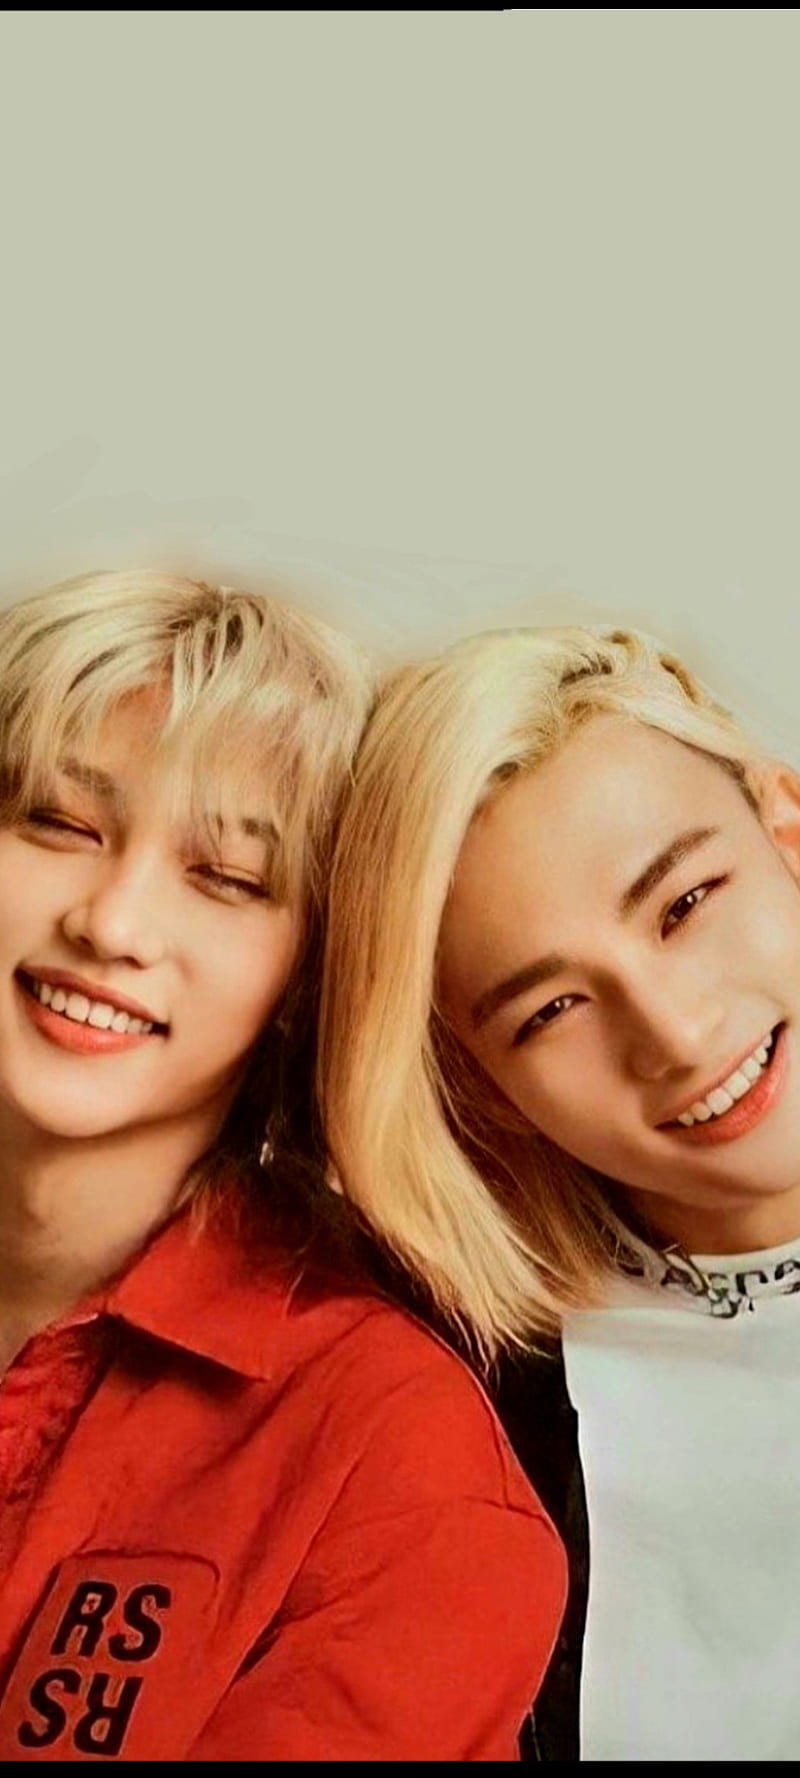  Hyunjin And Lee Felix Stray Kids K-Pop Poster, Hyunlix Couple  V6 Poster (16x24): Posters & Prints